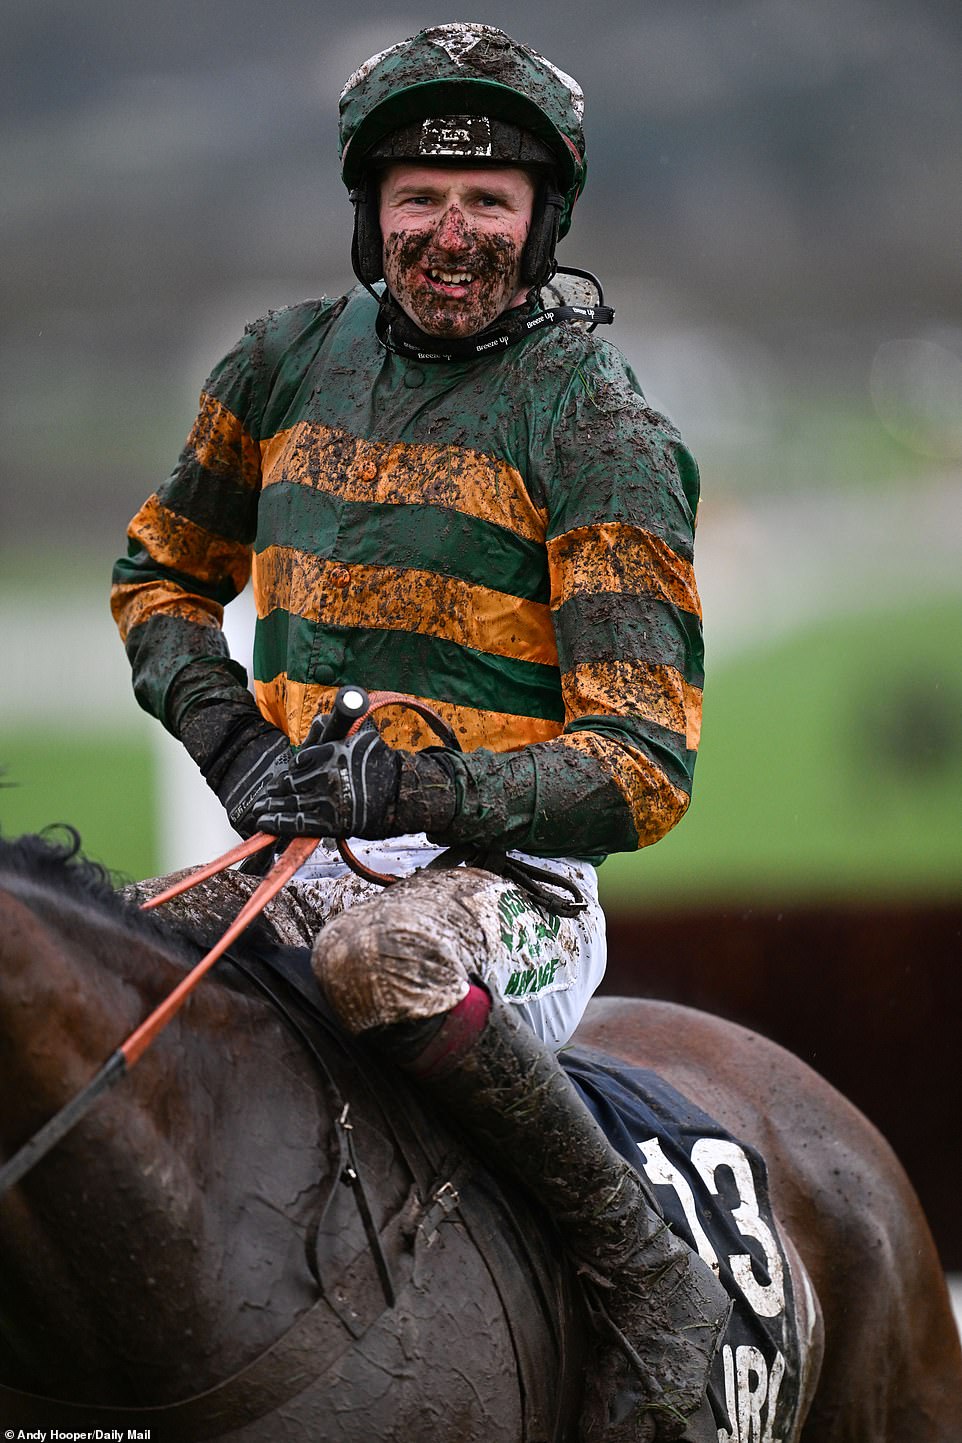 Declan Lavery, who rode A Wave Of The Sea in the amateur jockeys' handicap race, was left covered in mud after the race.